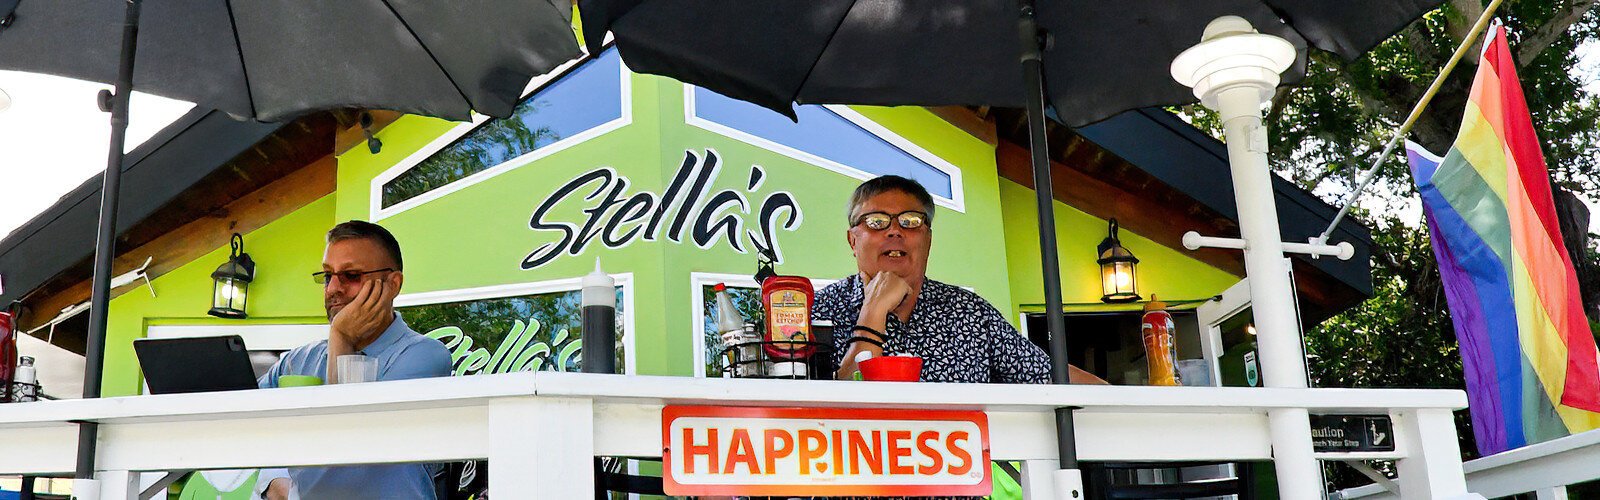 Seated by one of Gary King’s "HAPPINESS" signs, St Pete photographer J. R. enjoys relaxing moments on the open patio of Stella’s restaurant in Gulfport.